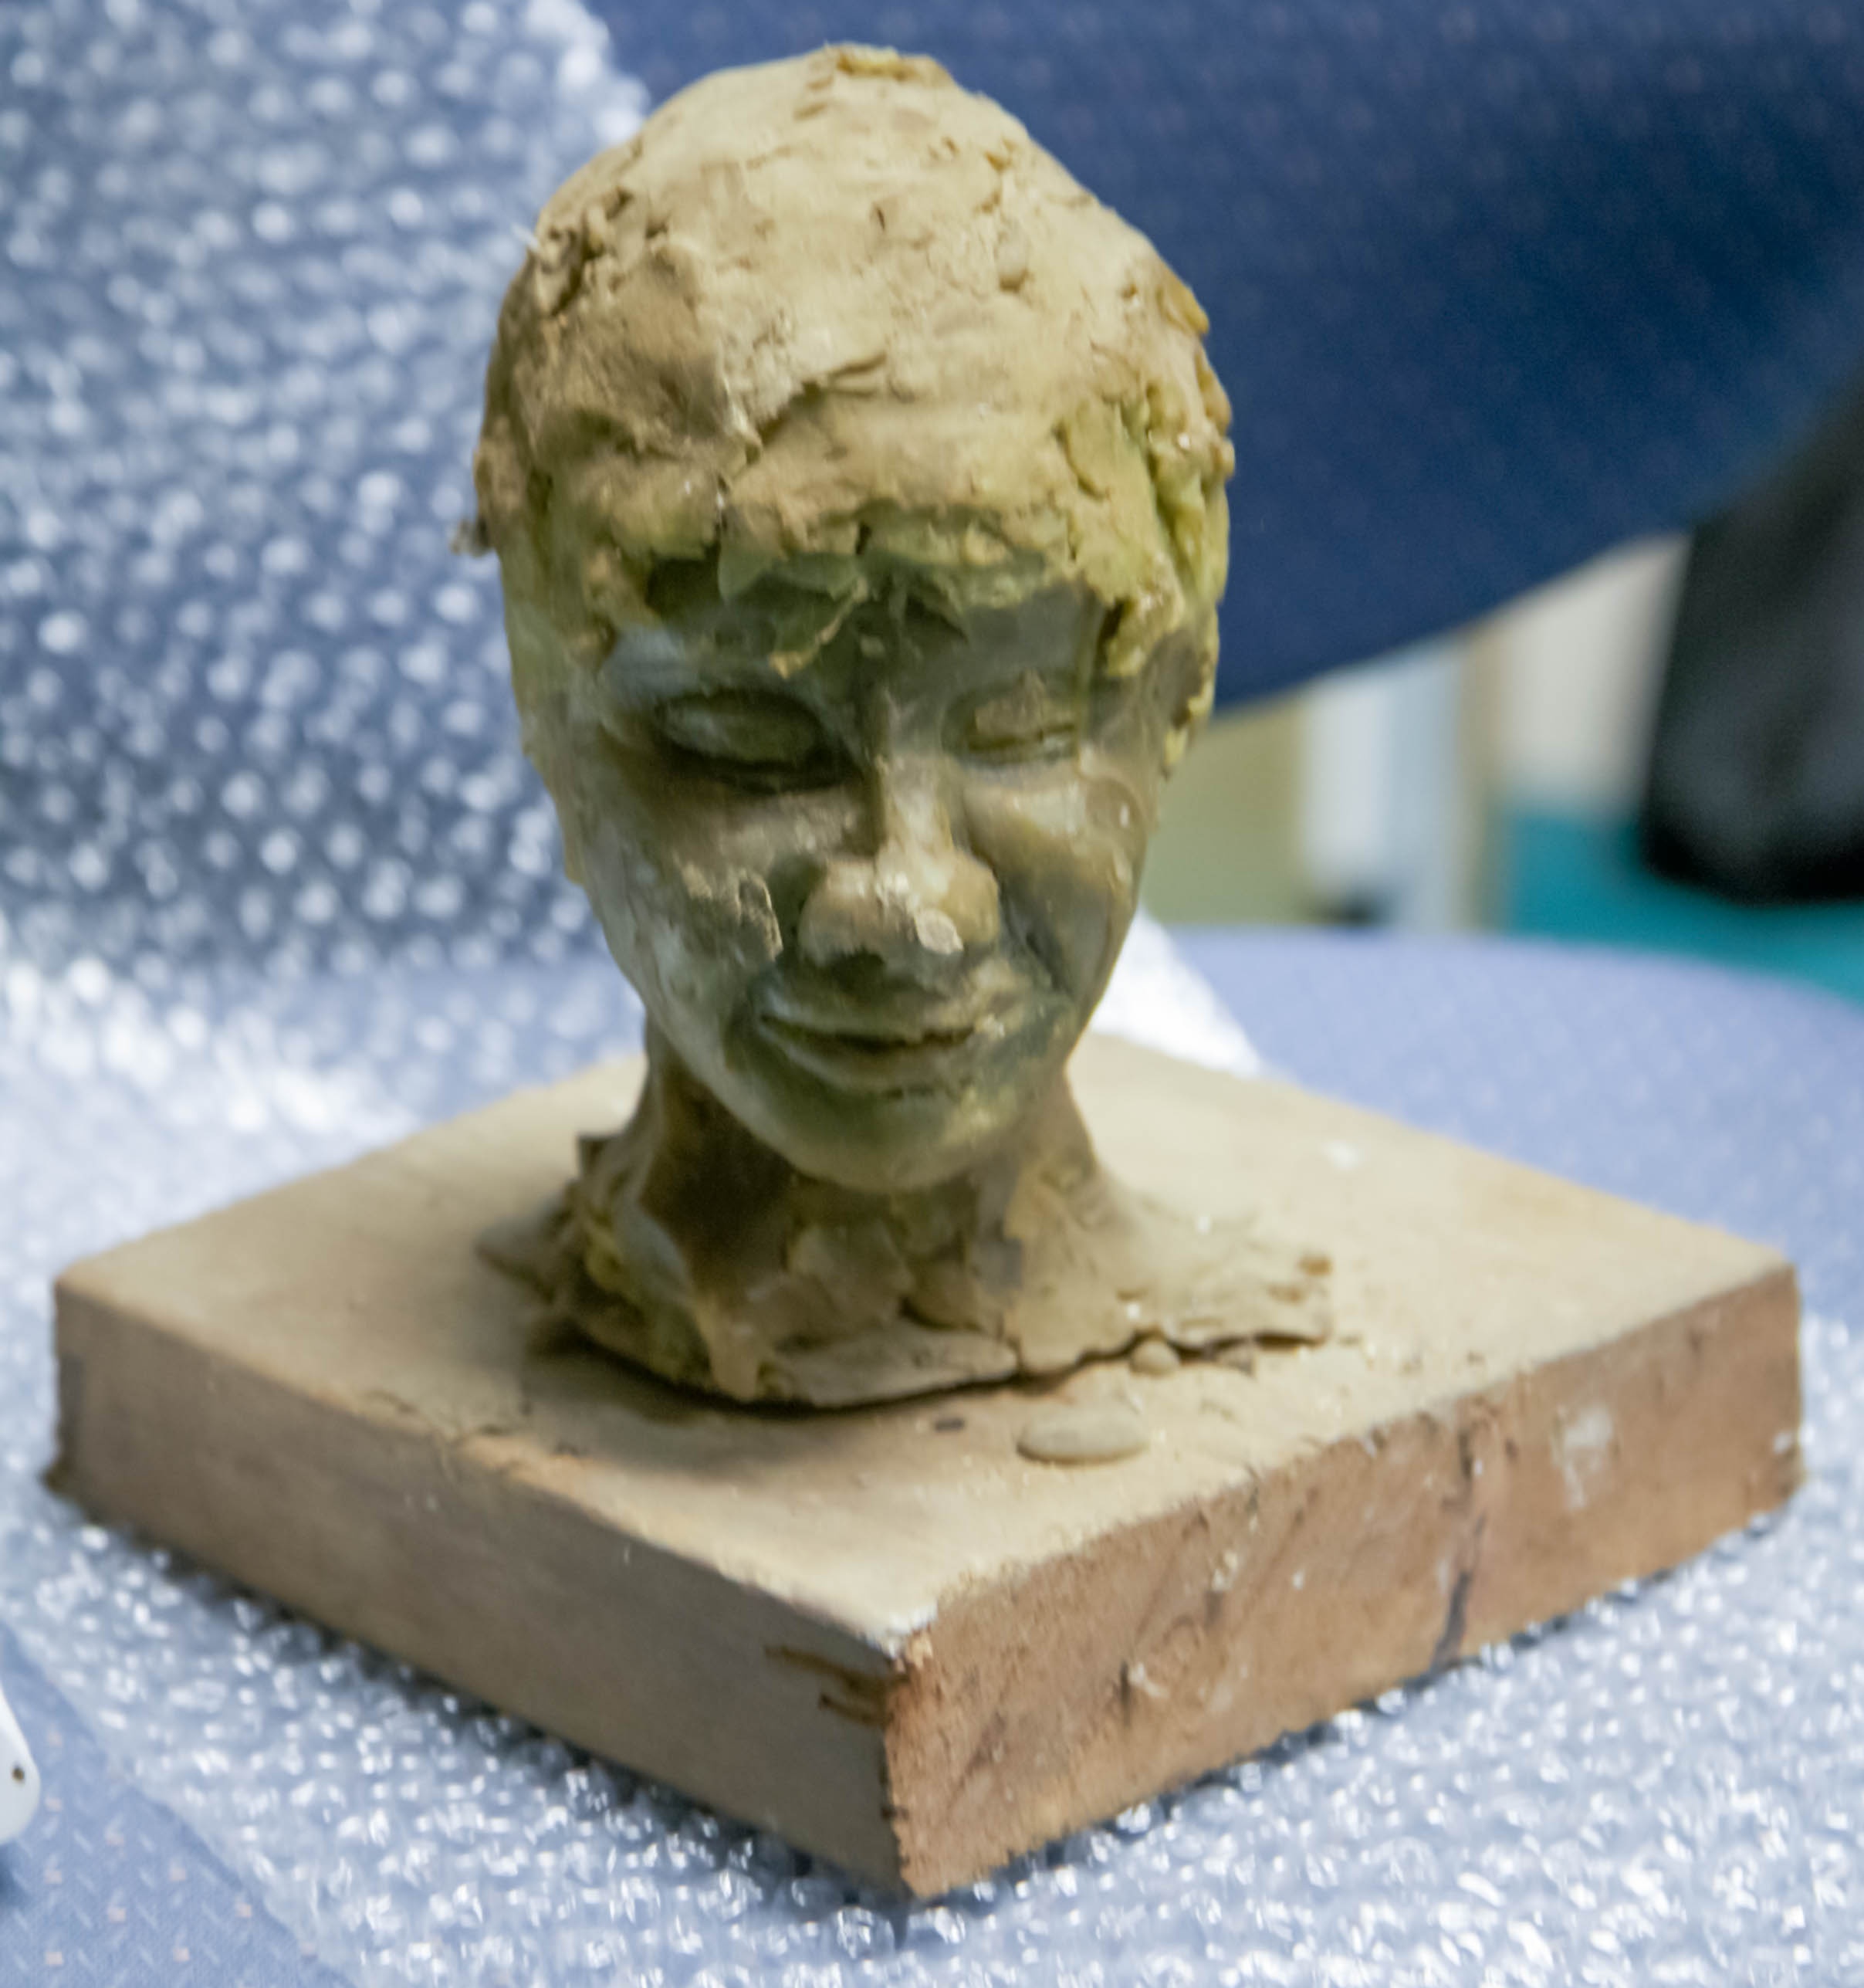 Bust of woman's head